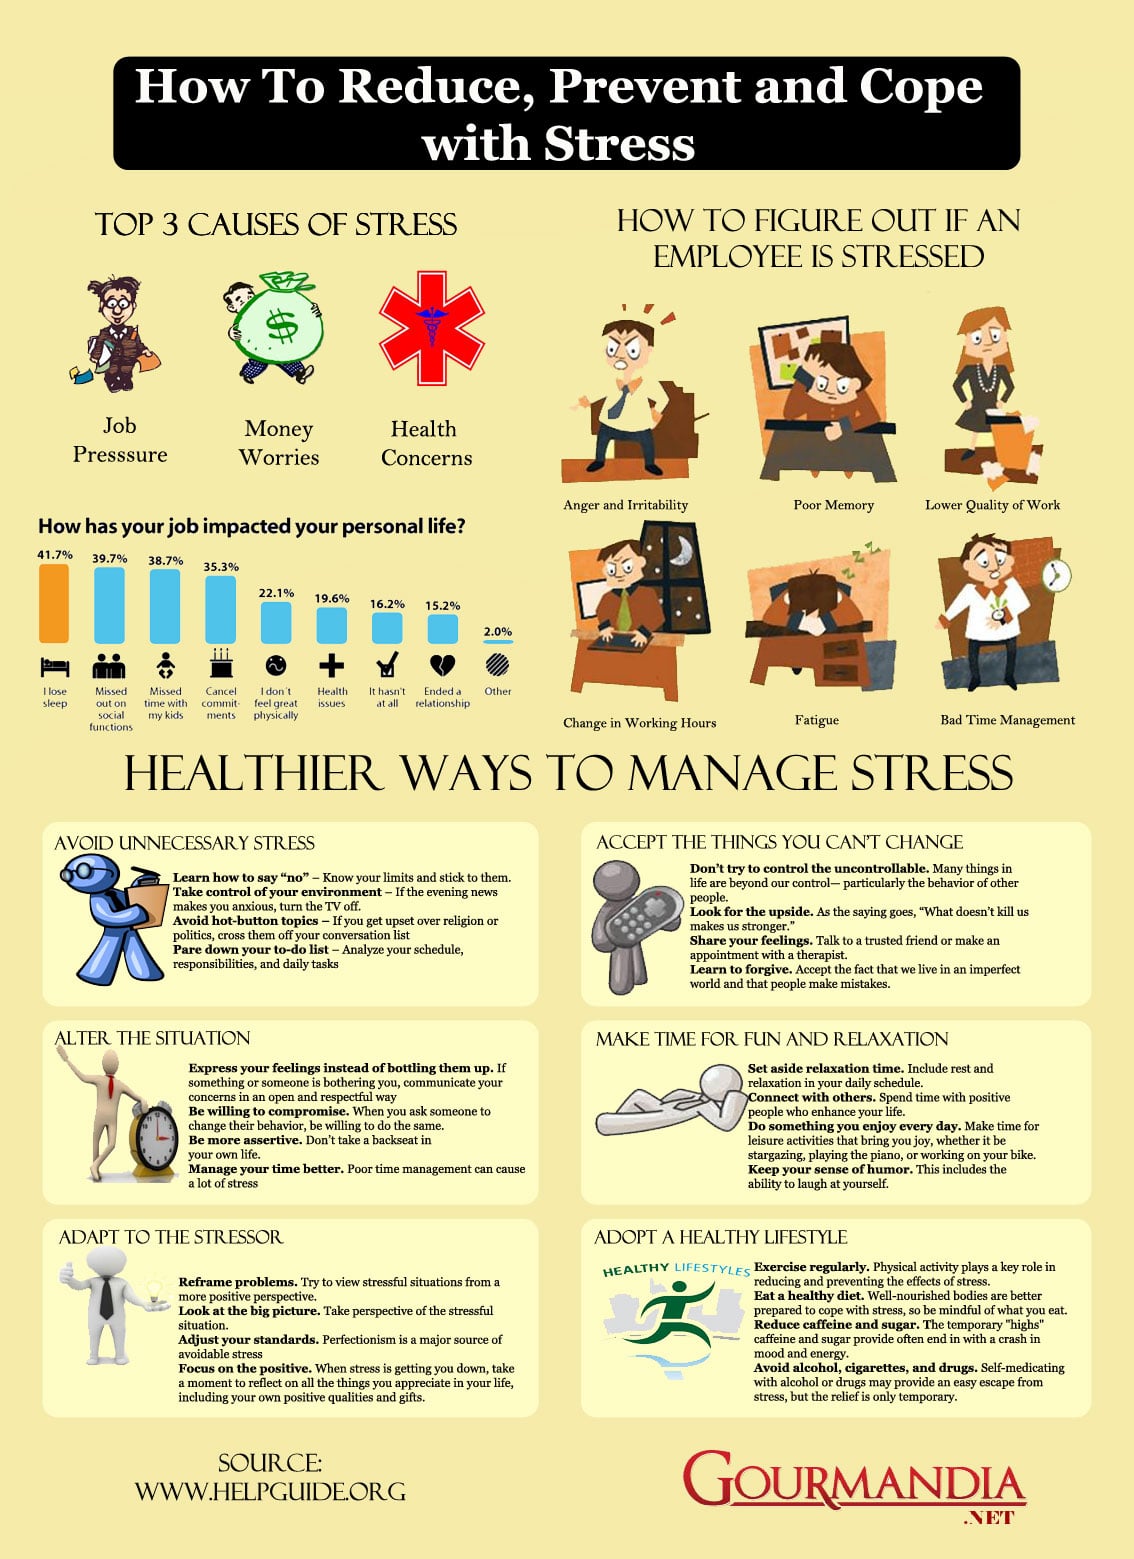 How To Reduce, Prevent & Cope With Everyday Stress [Infographic]